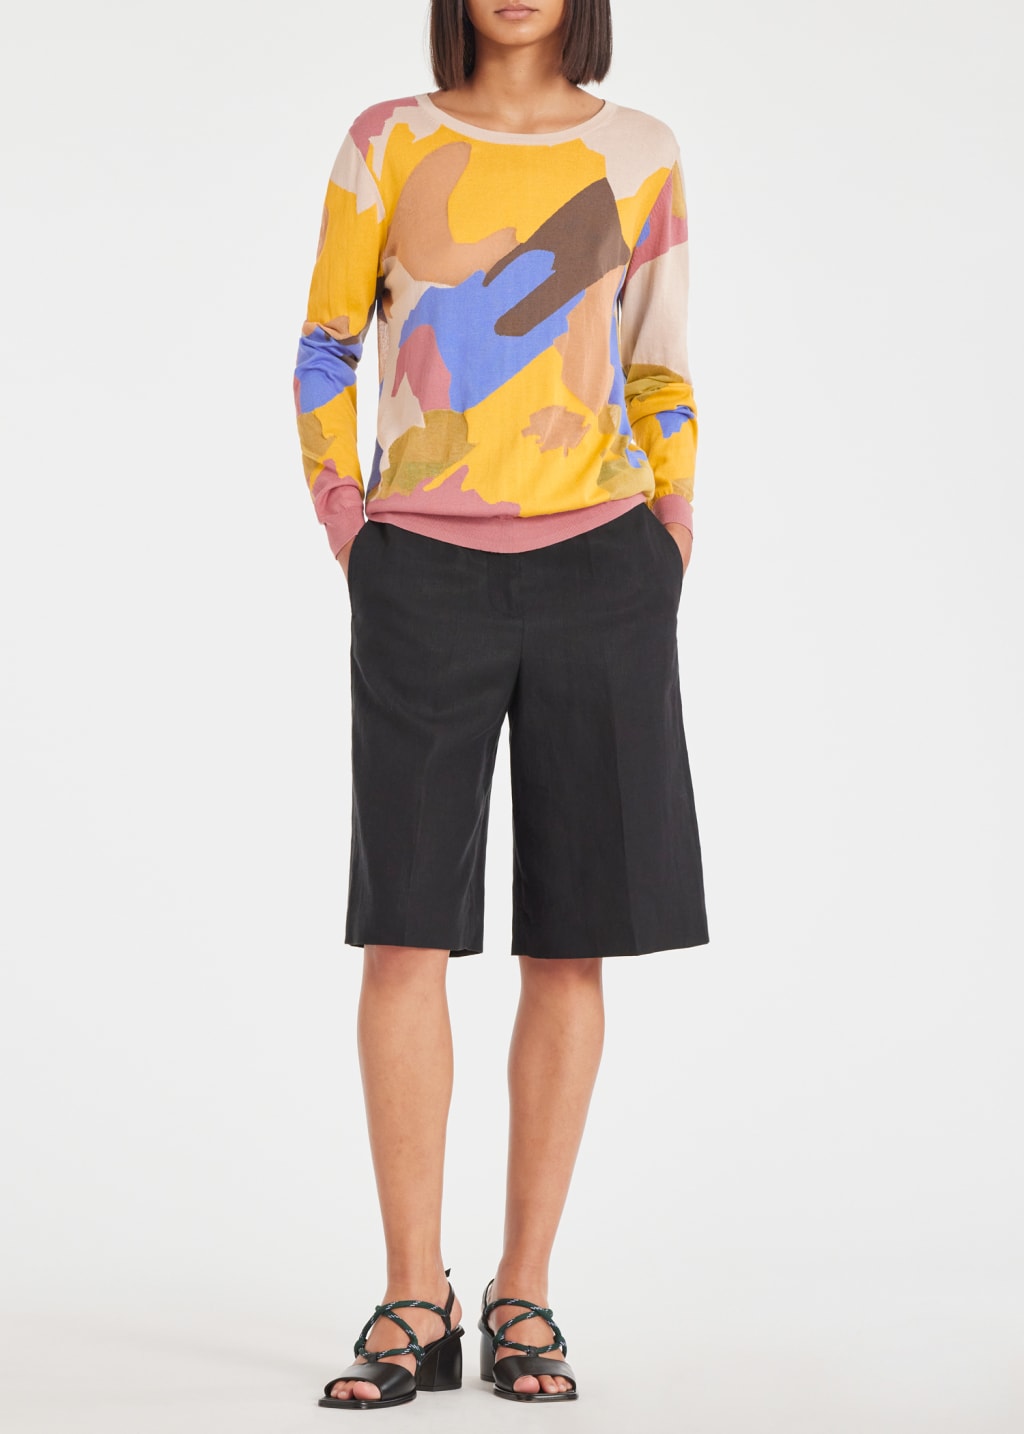 Model View - Women's 'Floral Collage' Intarsia Sweater Paul Smith